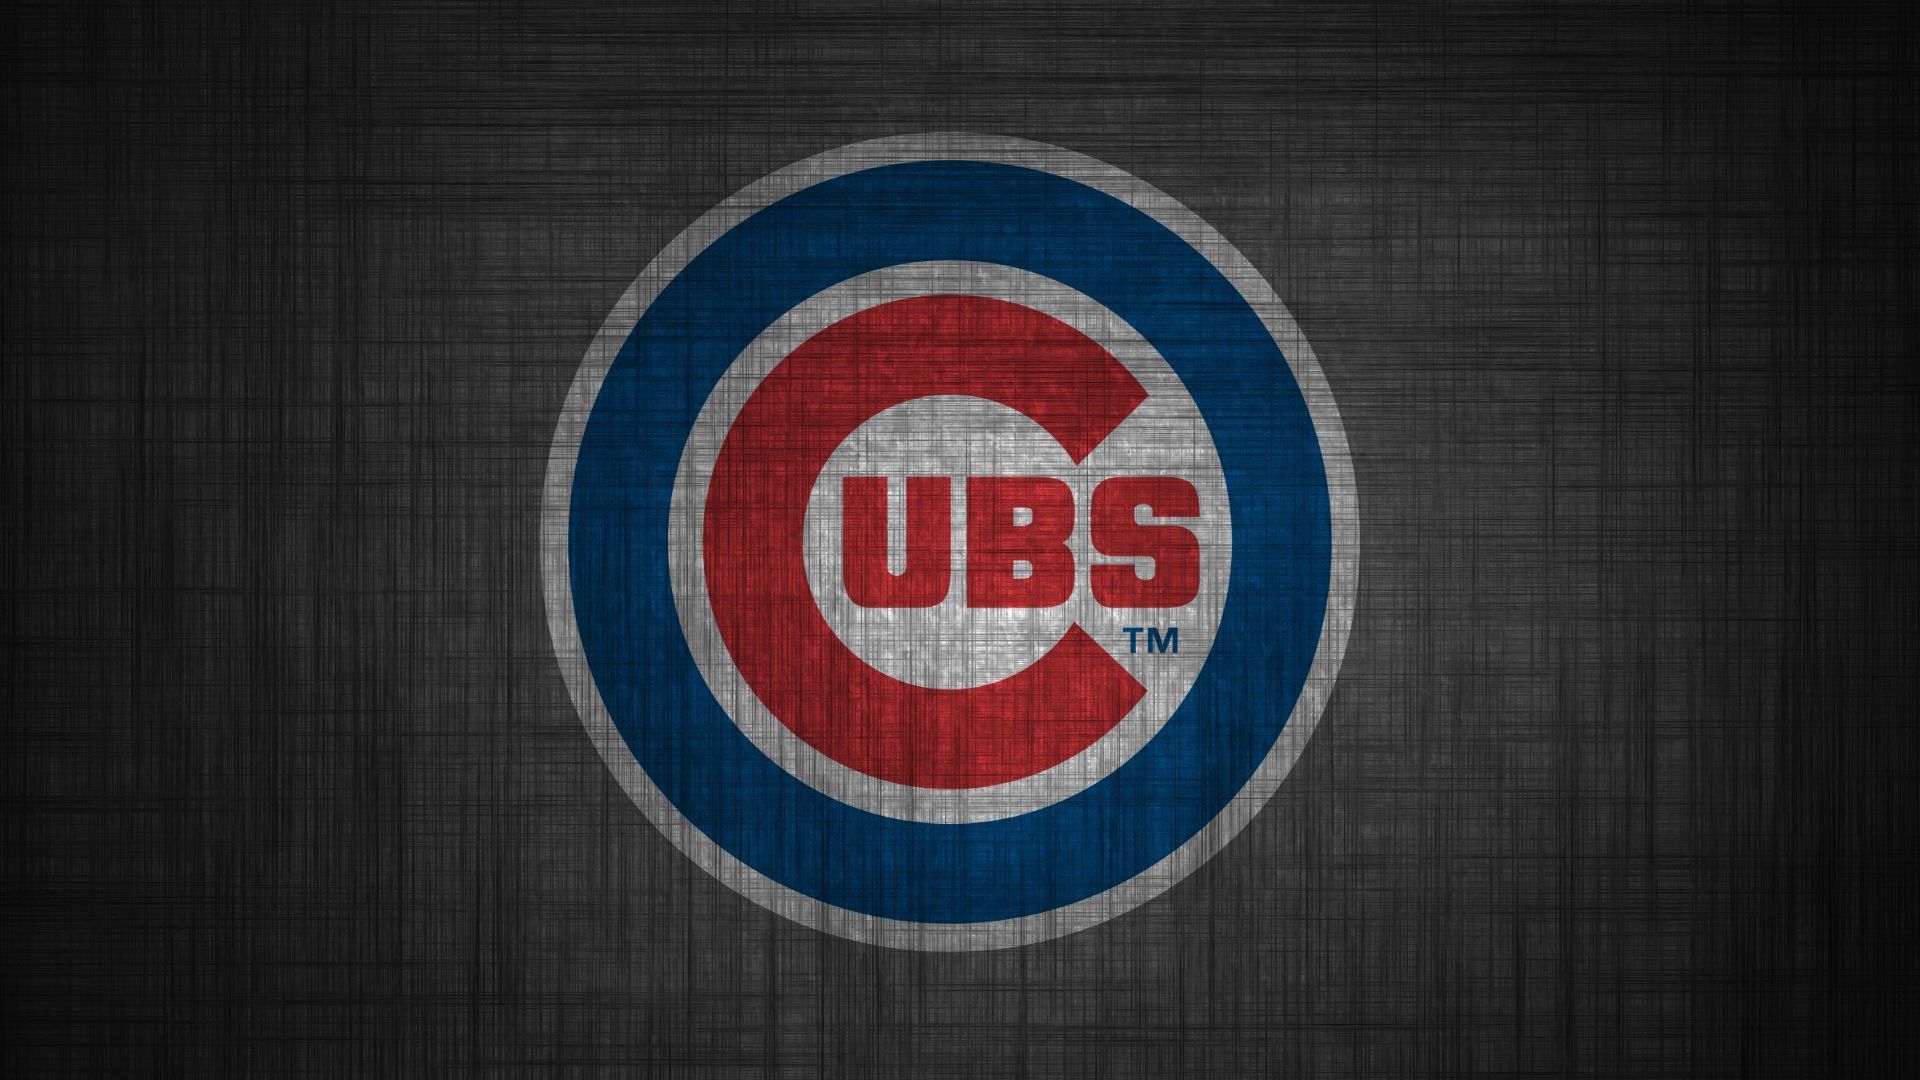 Chicago Cubs Computer Wallpapers